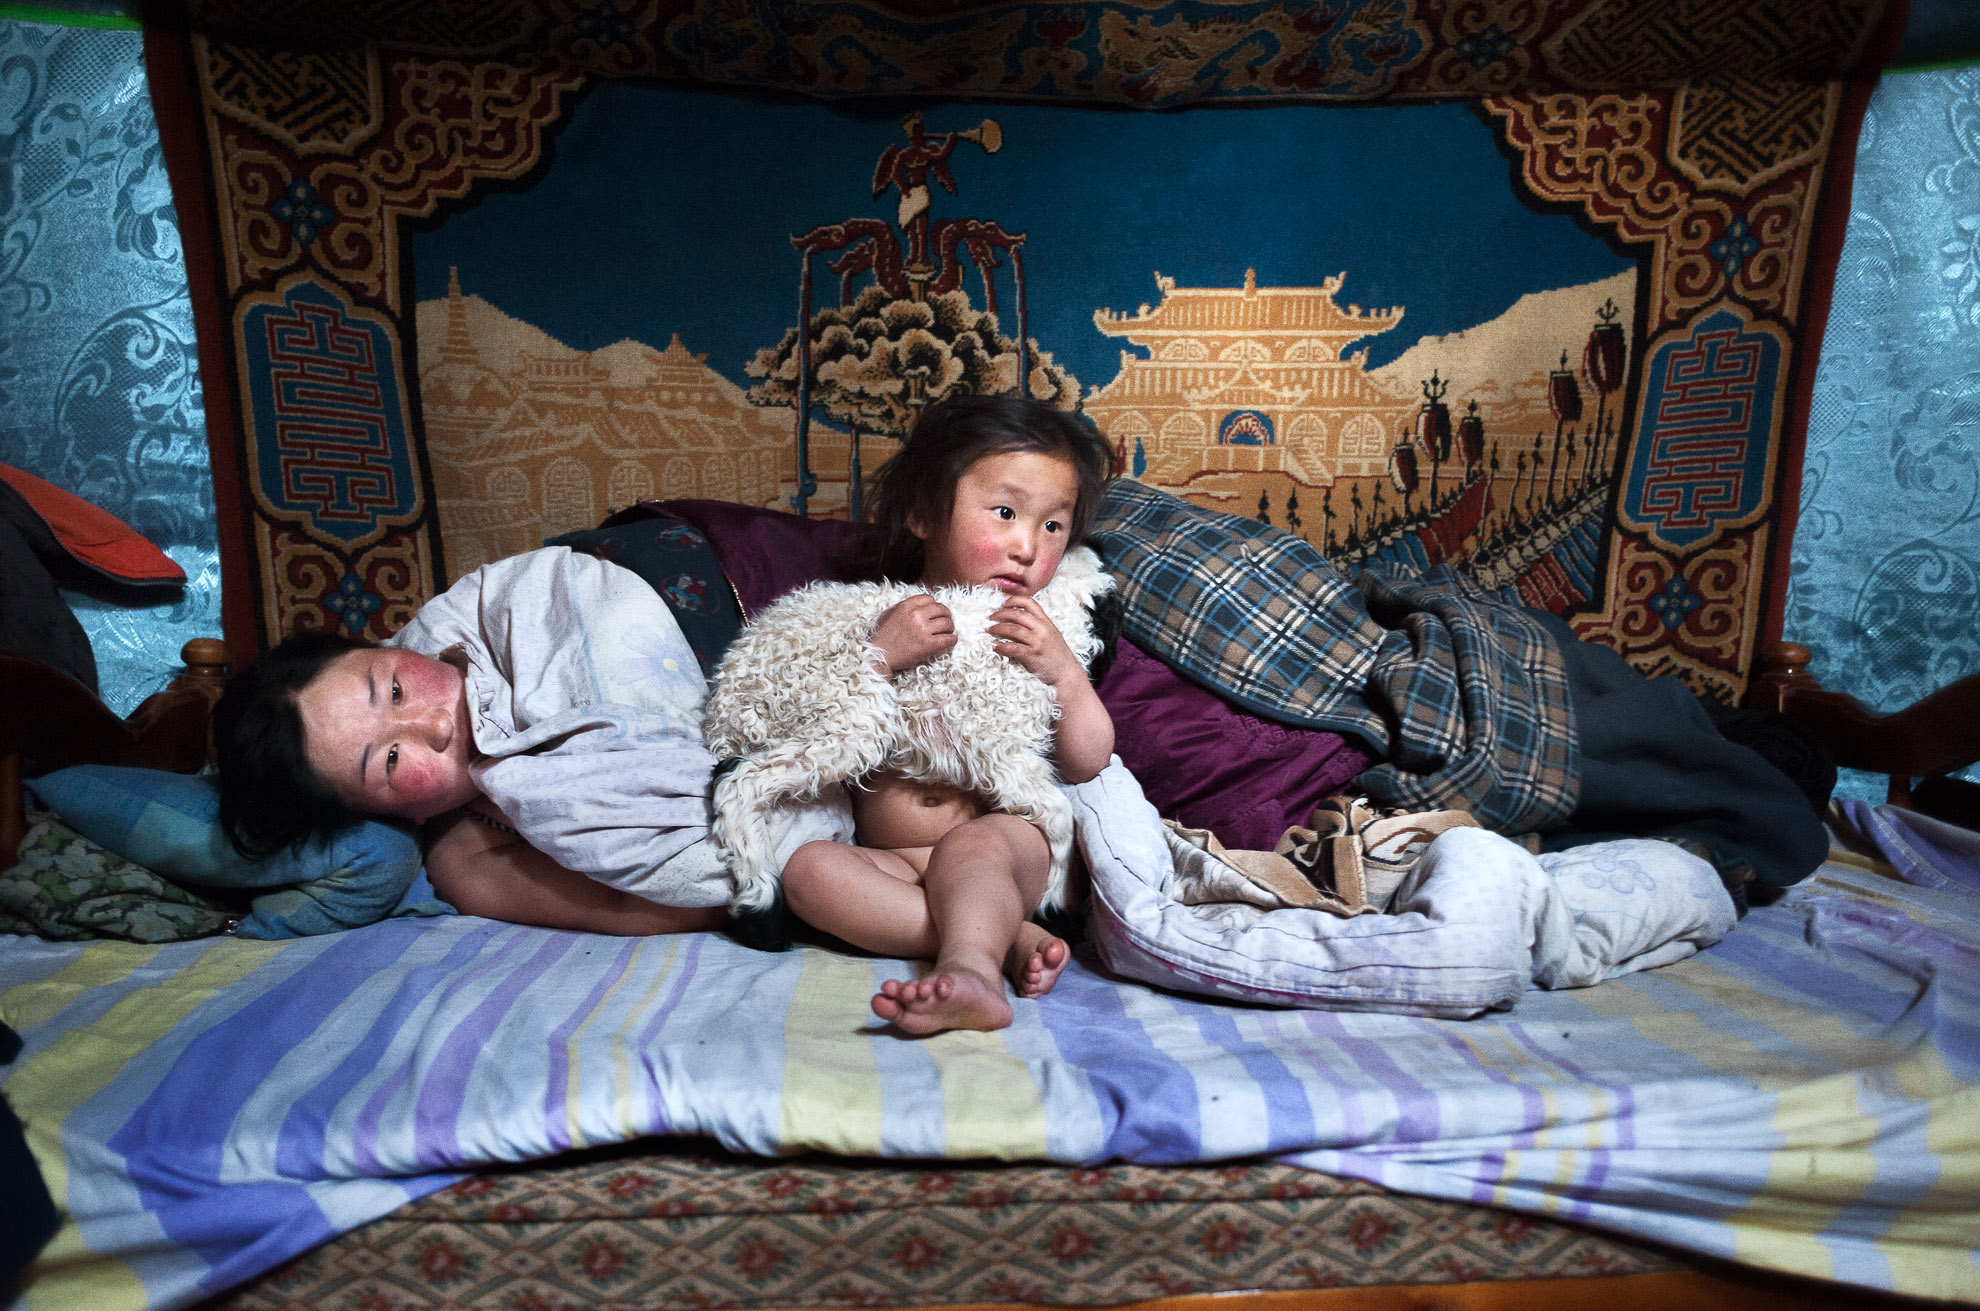 Mongolia, Arkhangay Province. 29 years-old Erdene Tuya together with her 3 years old son called Tuvchinj (he hugs a little lamb which sleeps with them). They just woke up while her husband Batgargal went out to have a look at the herd with the other son called Azjargal, 6 years old. In Mongolia's Arkhangai province, the Tsamba family lives on the edge, struggling through harsh winters alongside their herd of sheep. Severe winter conditions, known as dzud, have been responsible for the deaths of half the family's once 2,000-strong herd over the past three winters. Recently, in search of warmer pastures, the Tsambas moved from Bulgan Province in the north to this region near a central Mongolian village called Ulziit.